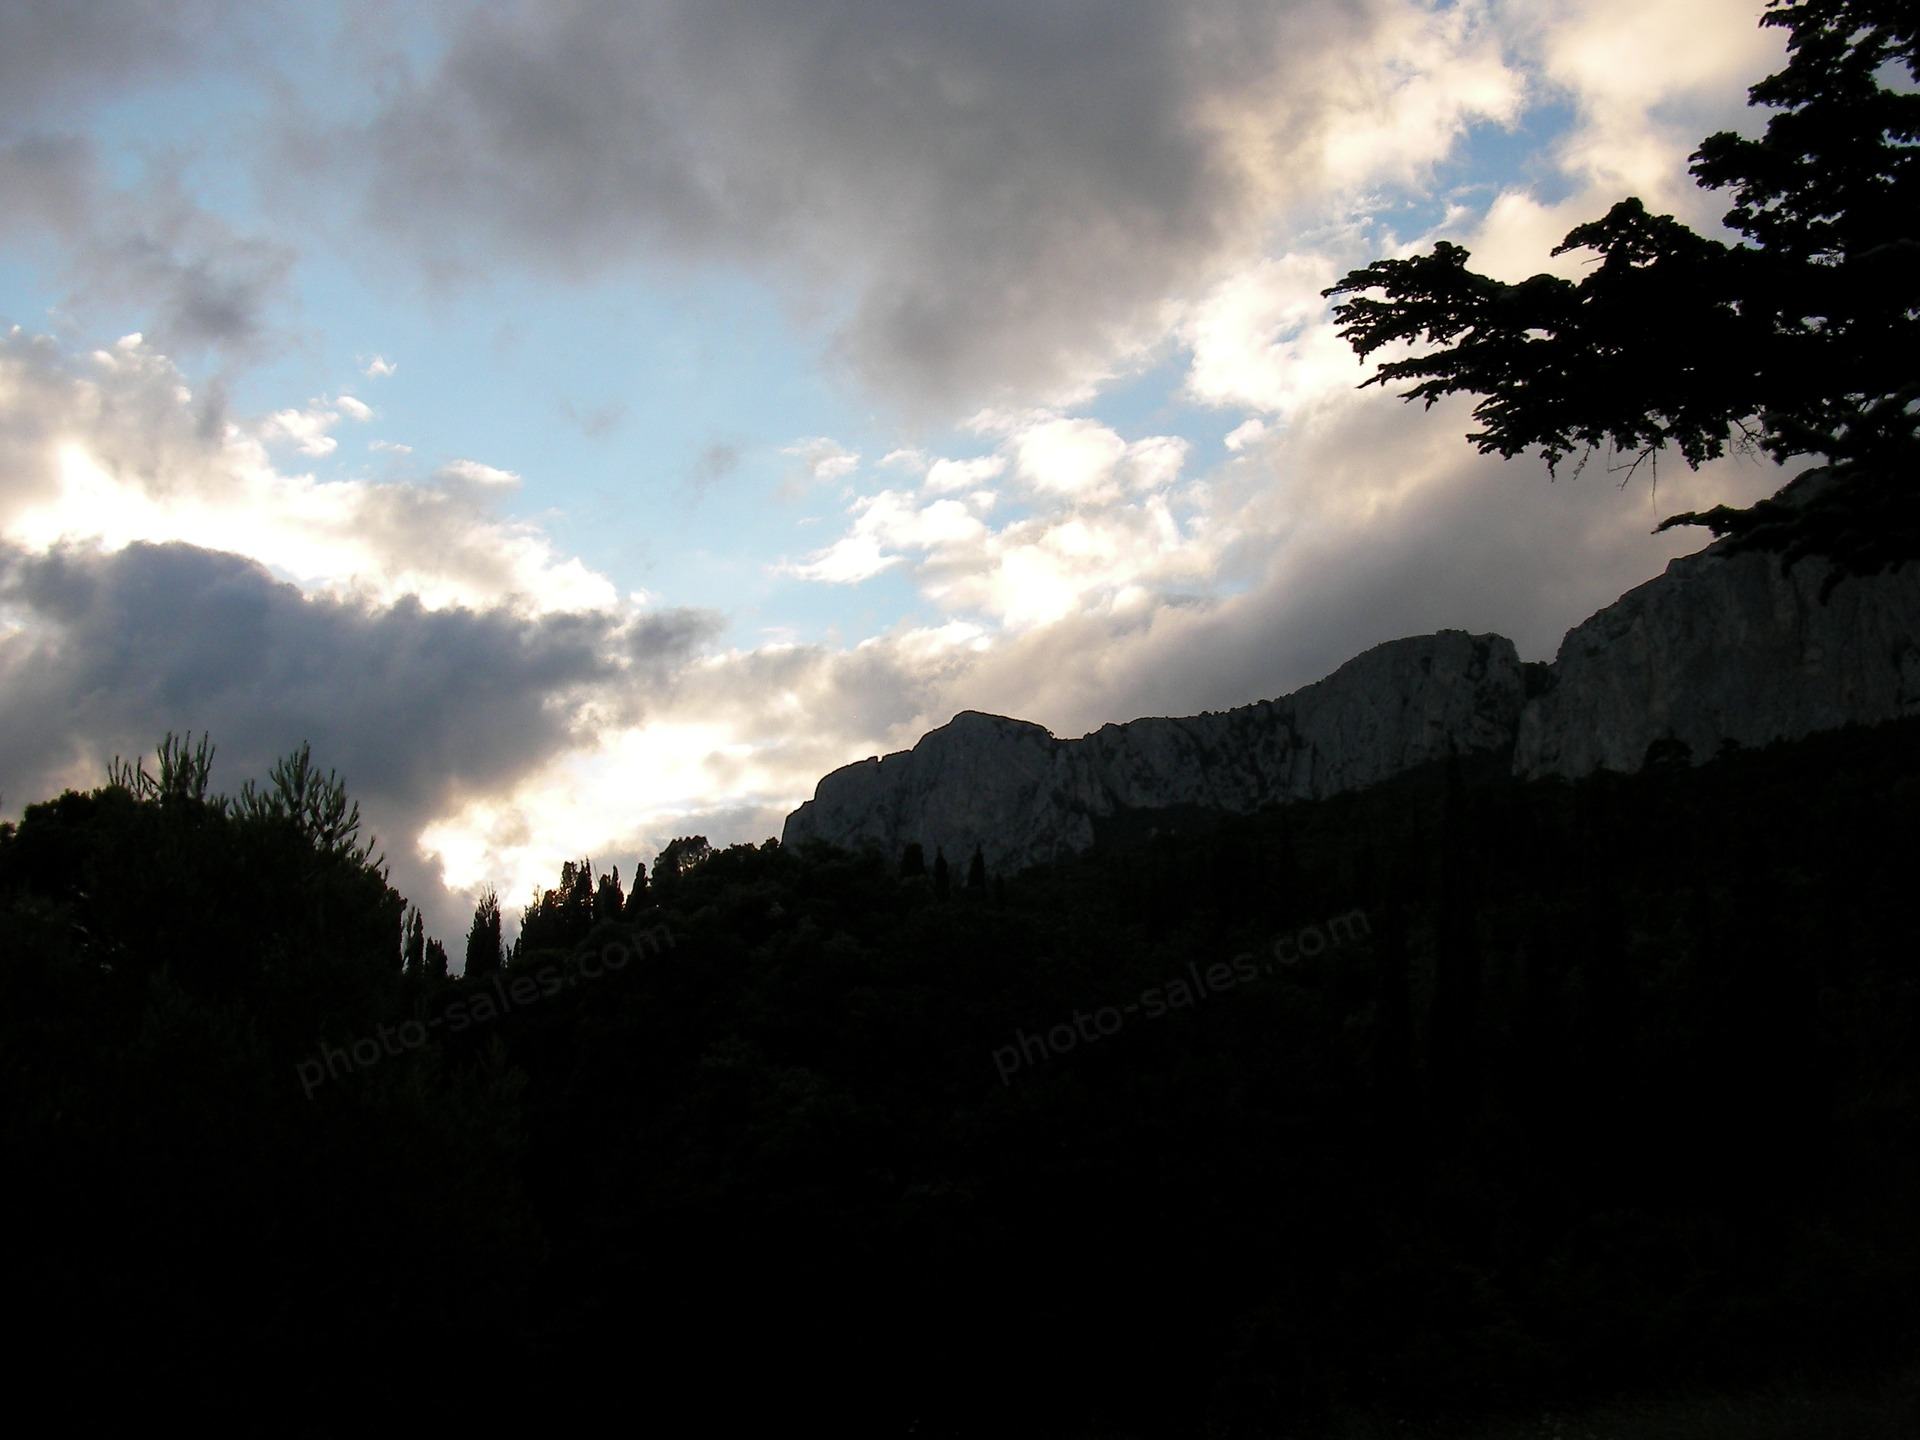 Crimean mountains in the evening